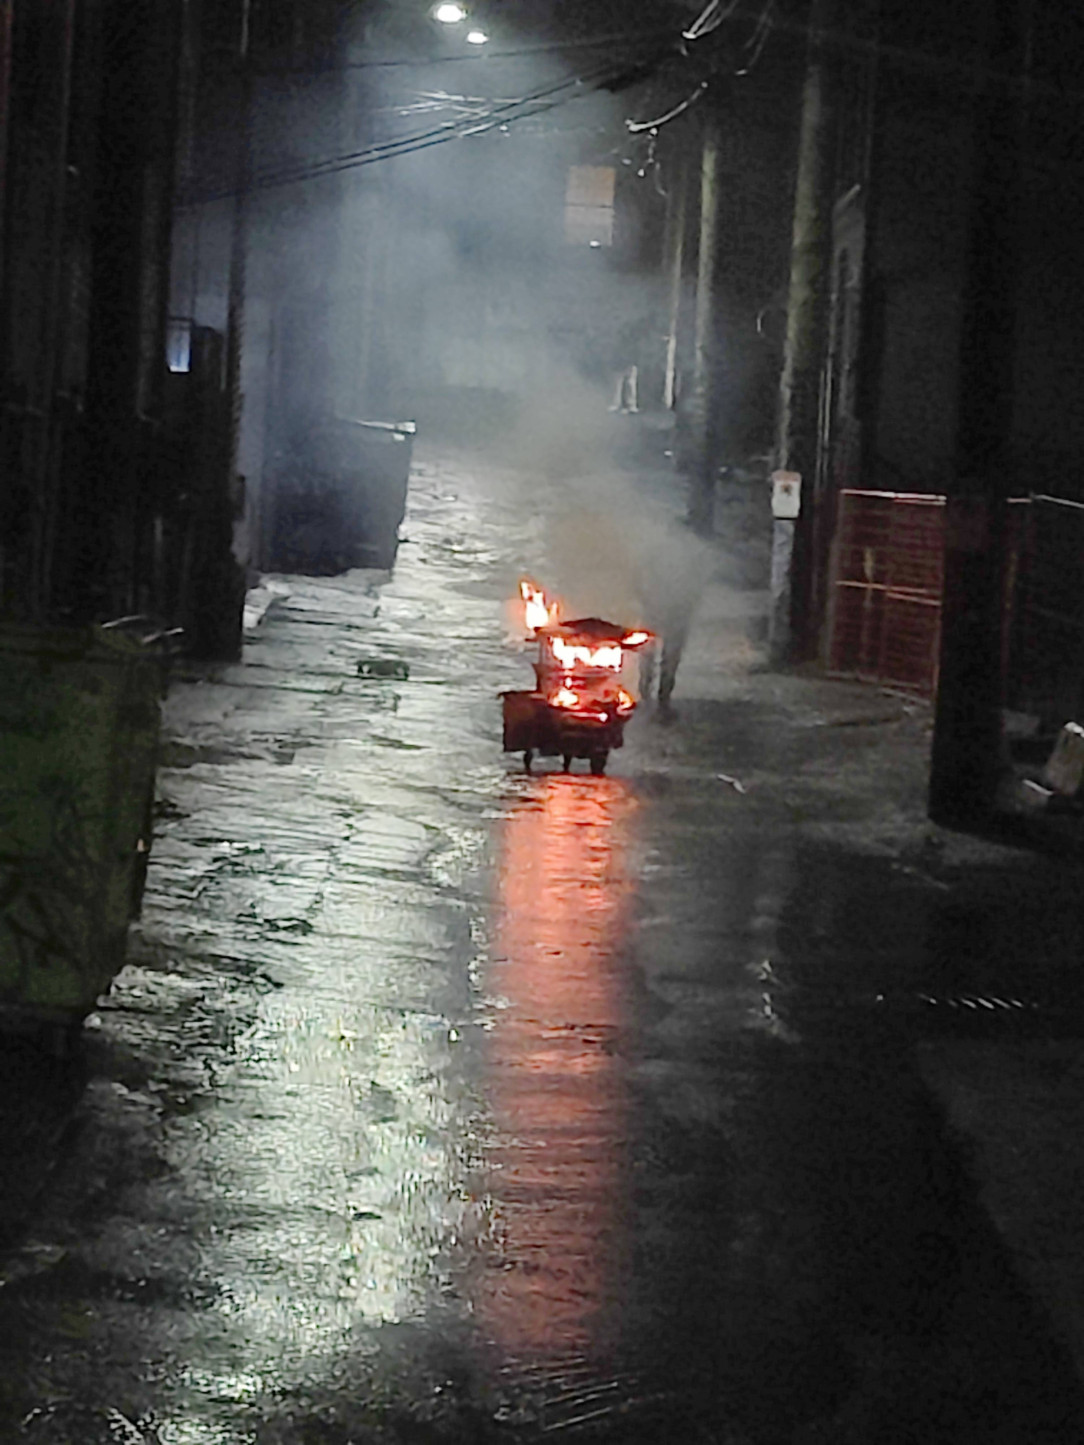 Man pushing a flaming shopping cart down an alleyway in Vancouver